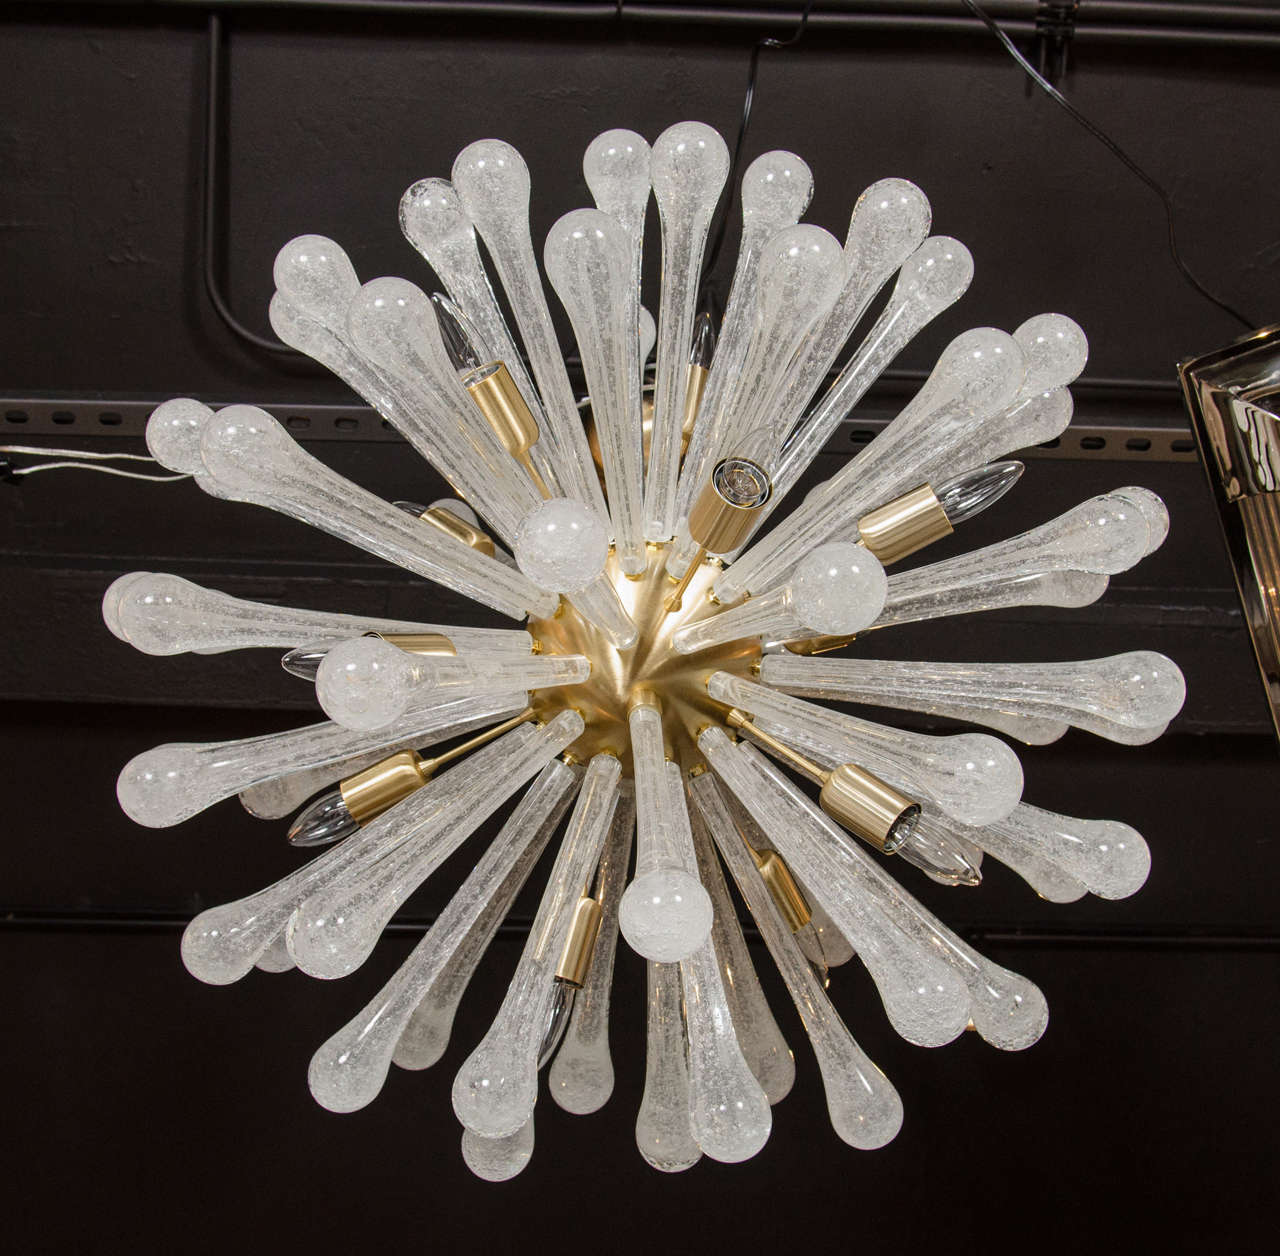 This dramatic glass sputnik chandelier was hand blown in Murano, Italy, the island off the coast of Venice renowned for centuries for its superlative glass production. It features an abundance of effervescent semi-translucent glass rods with